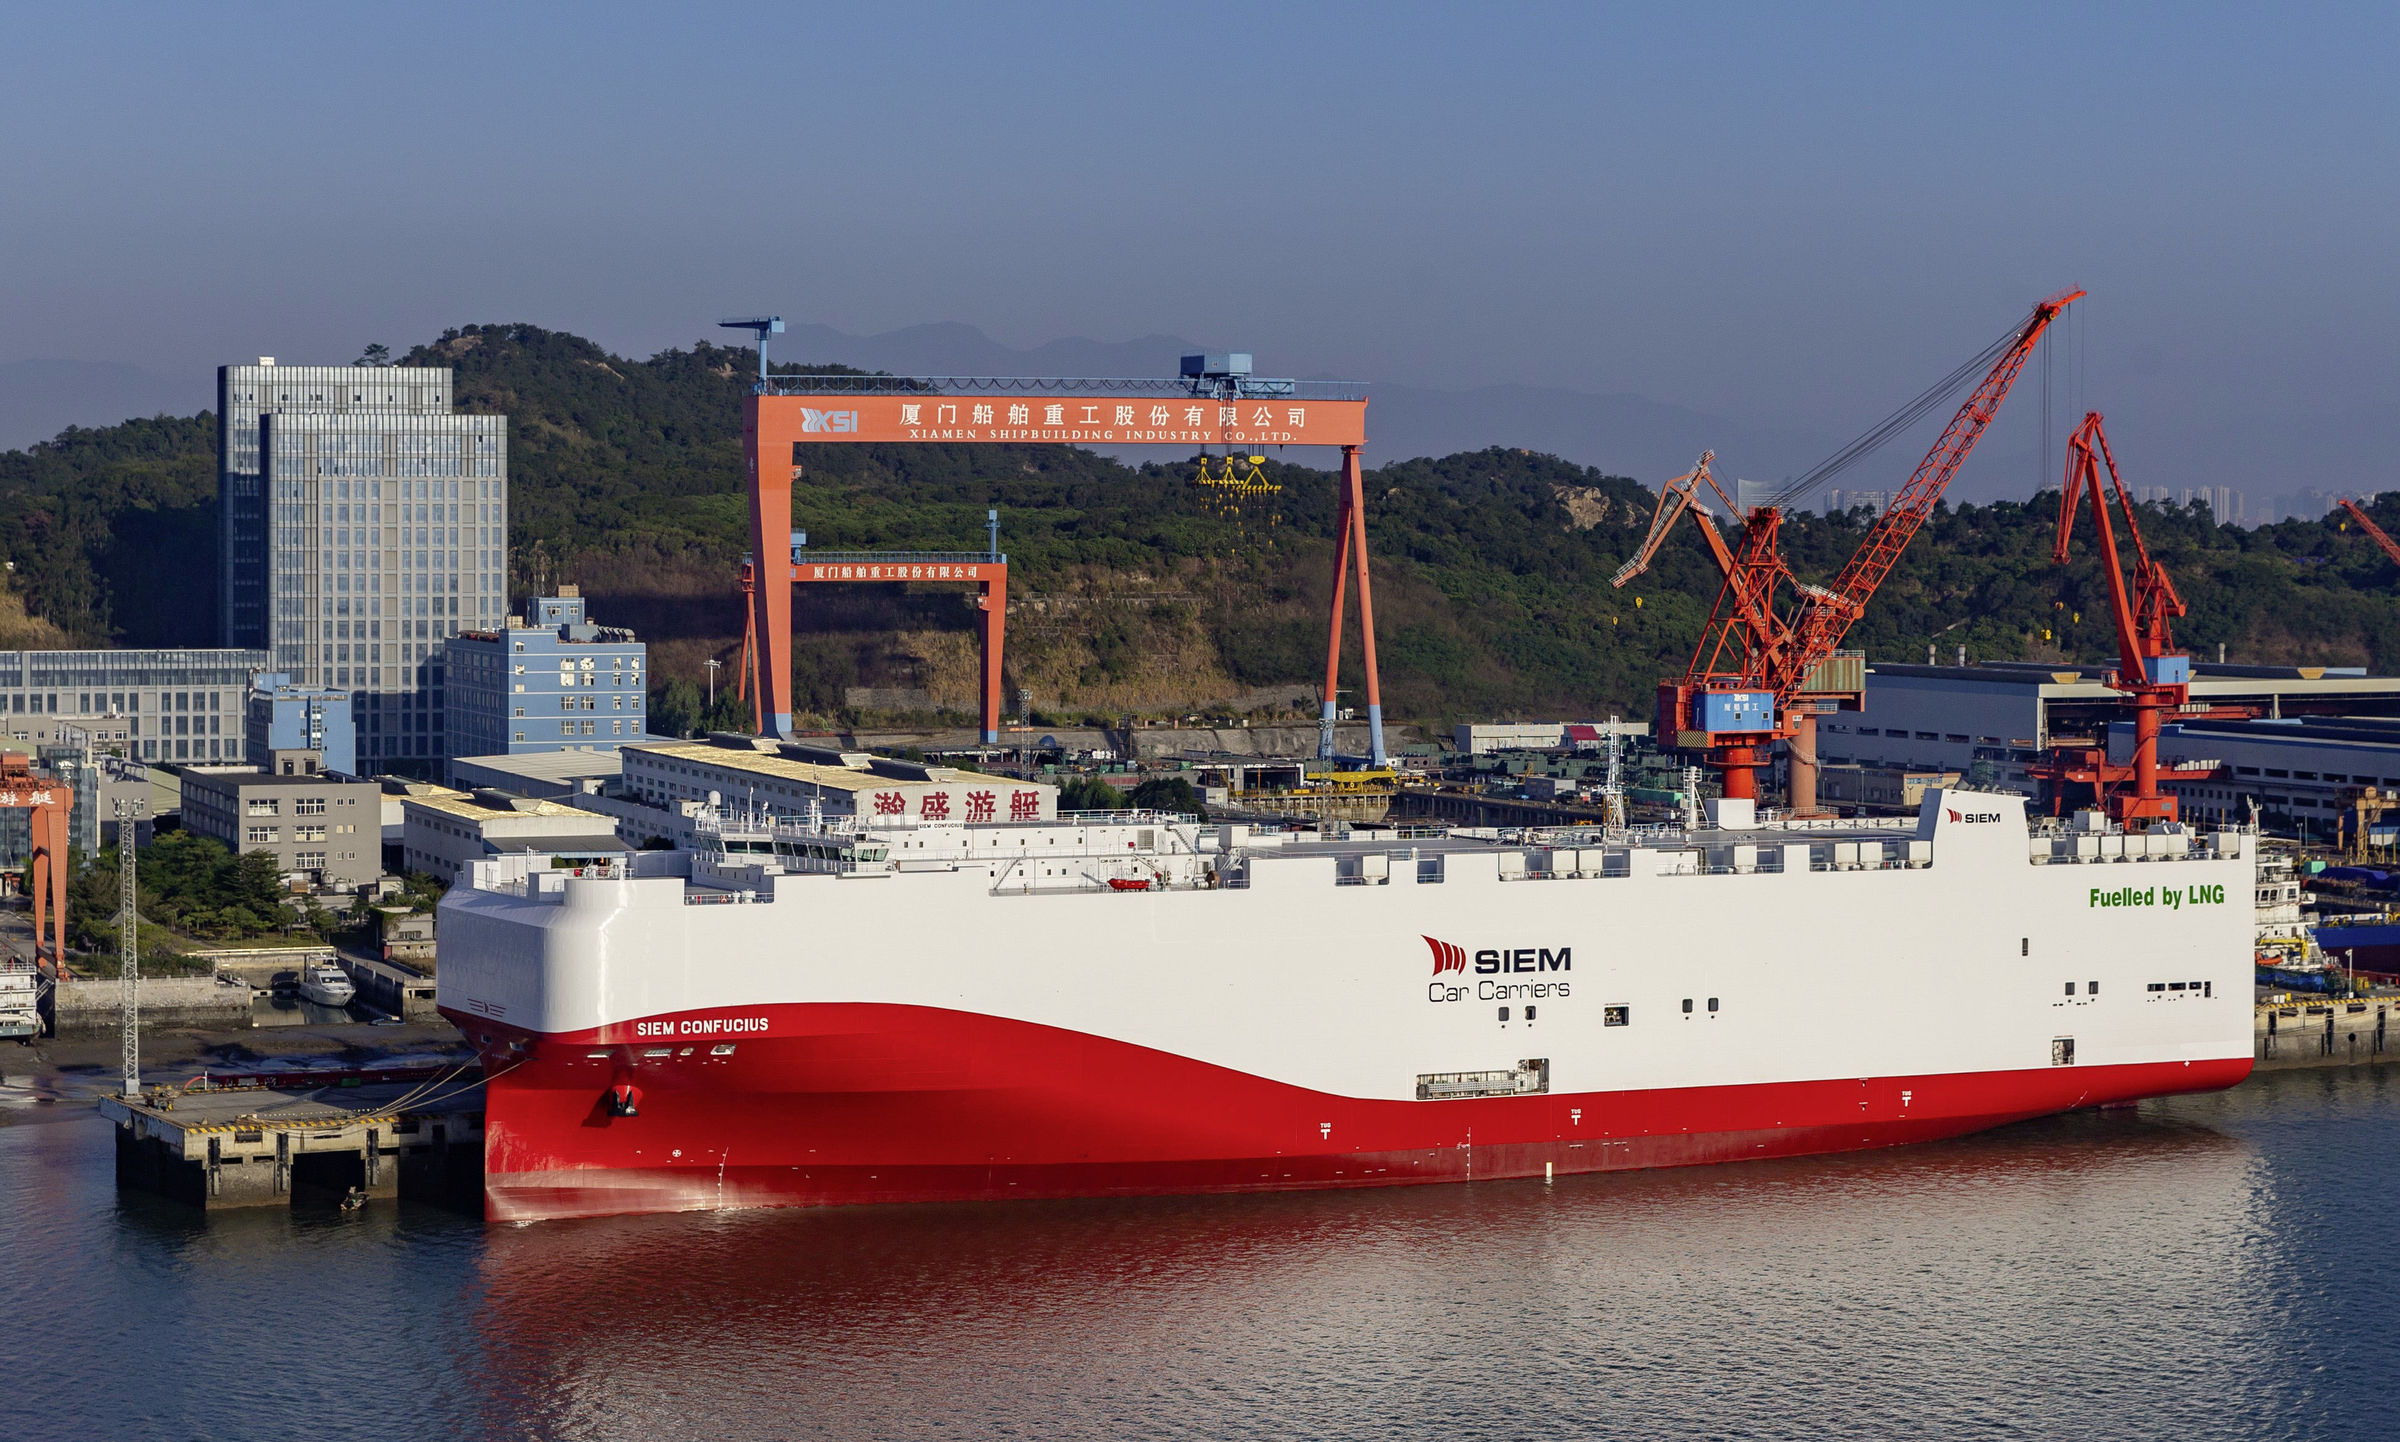 Two LNG-powered car freighters from Siem Car Carriers AS launched in Xiamen, China